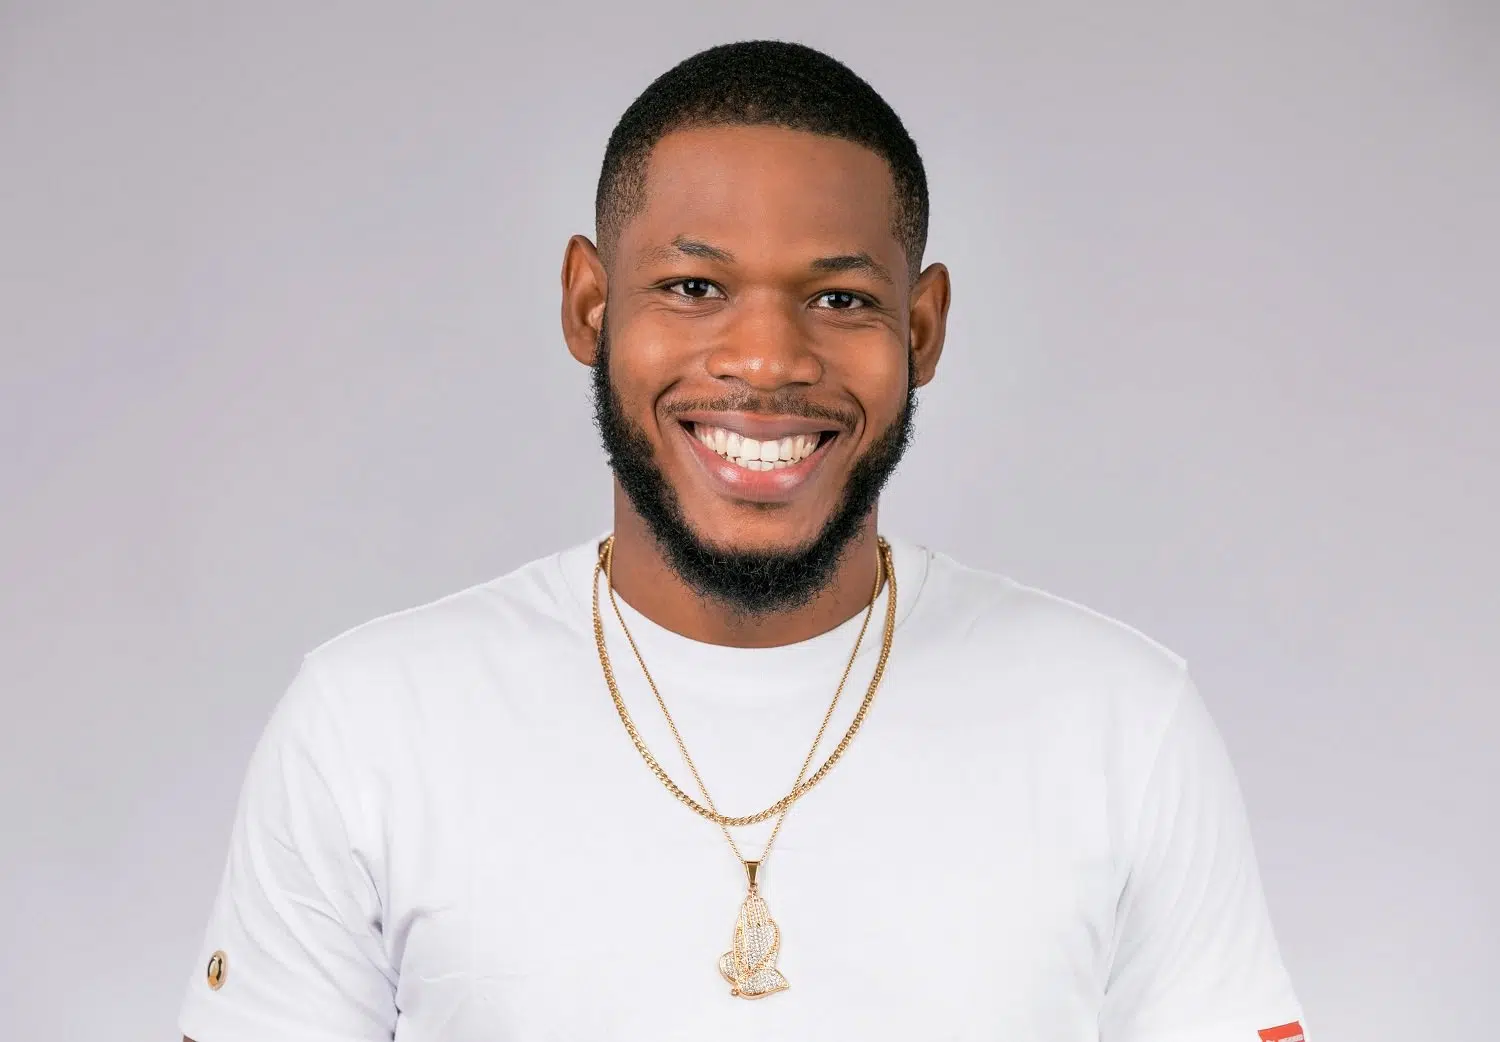 Hold your partner tight, good girls are scarce and you'll get nothing in 2023 - Frodd advises men 